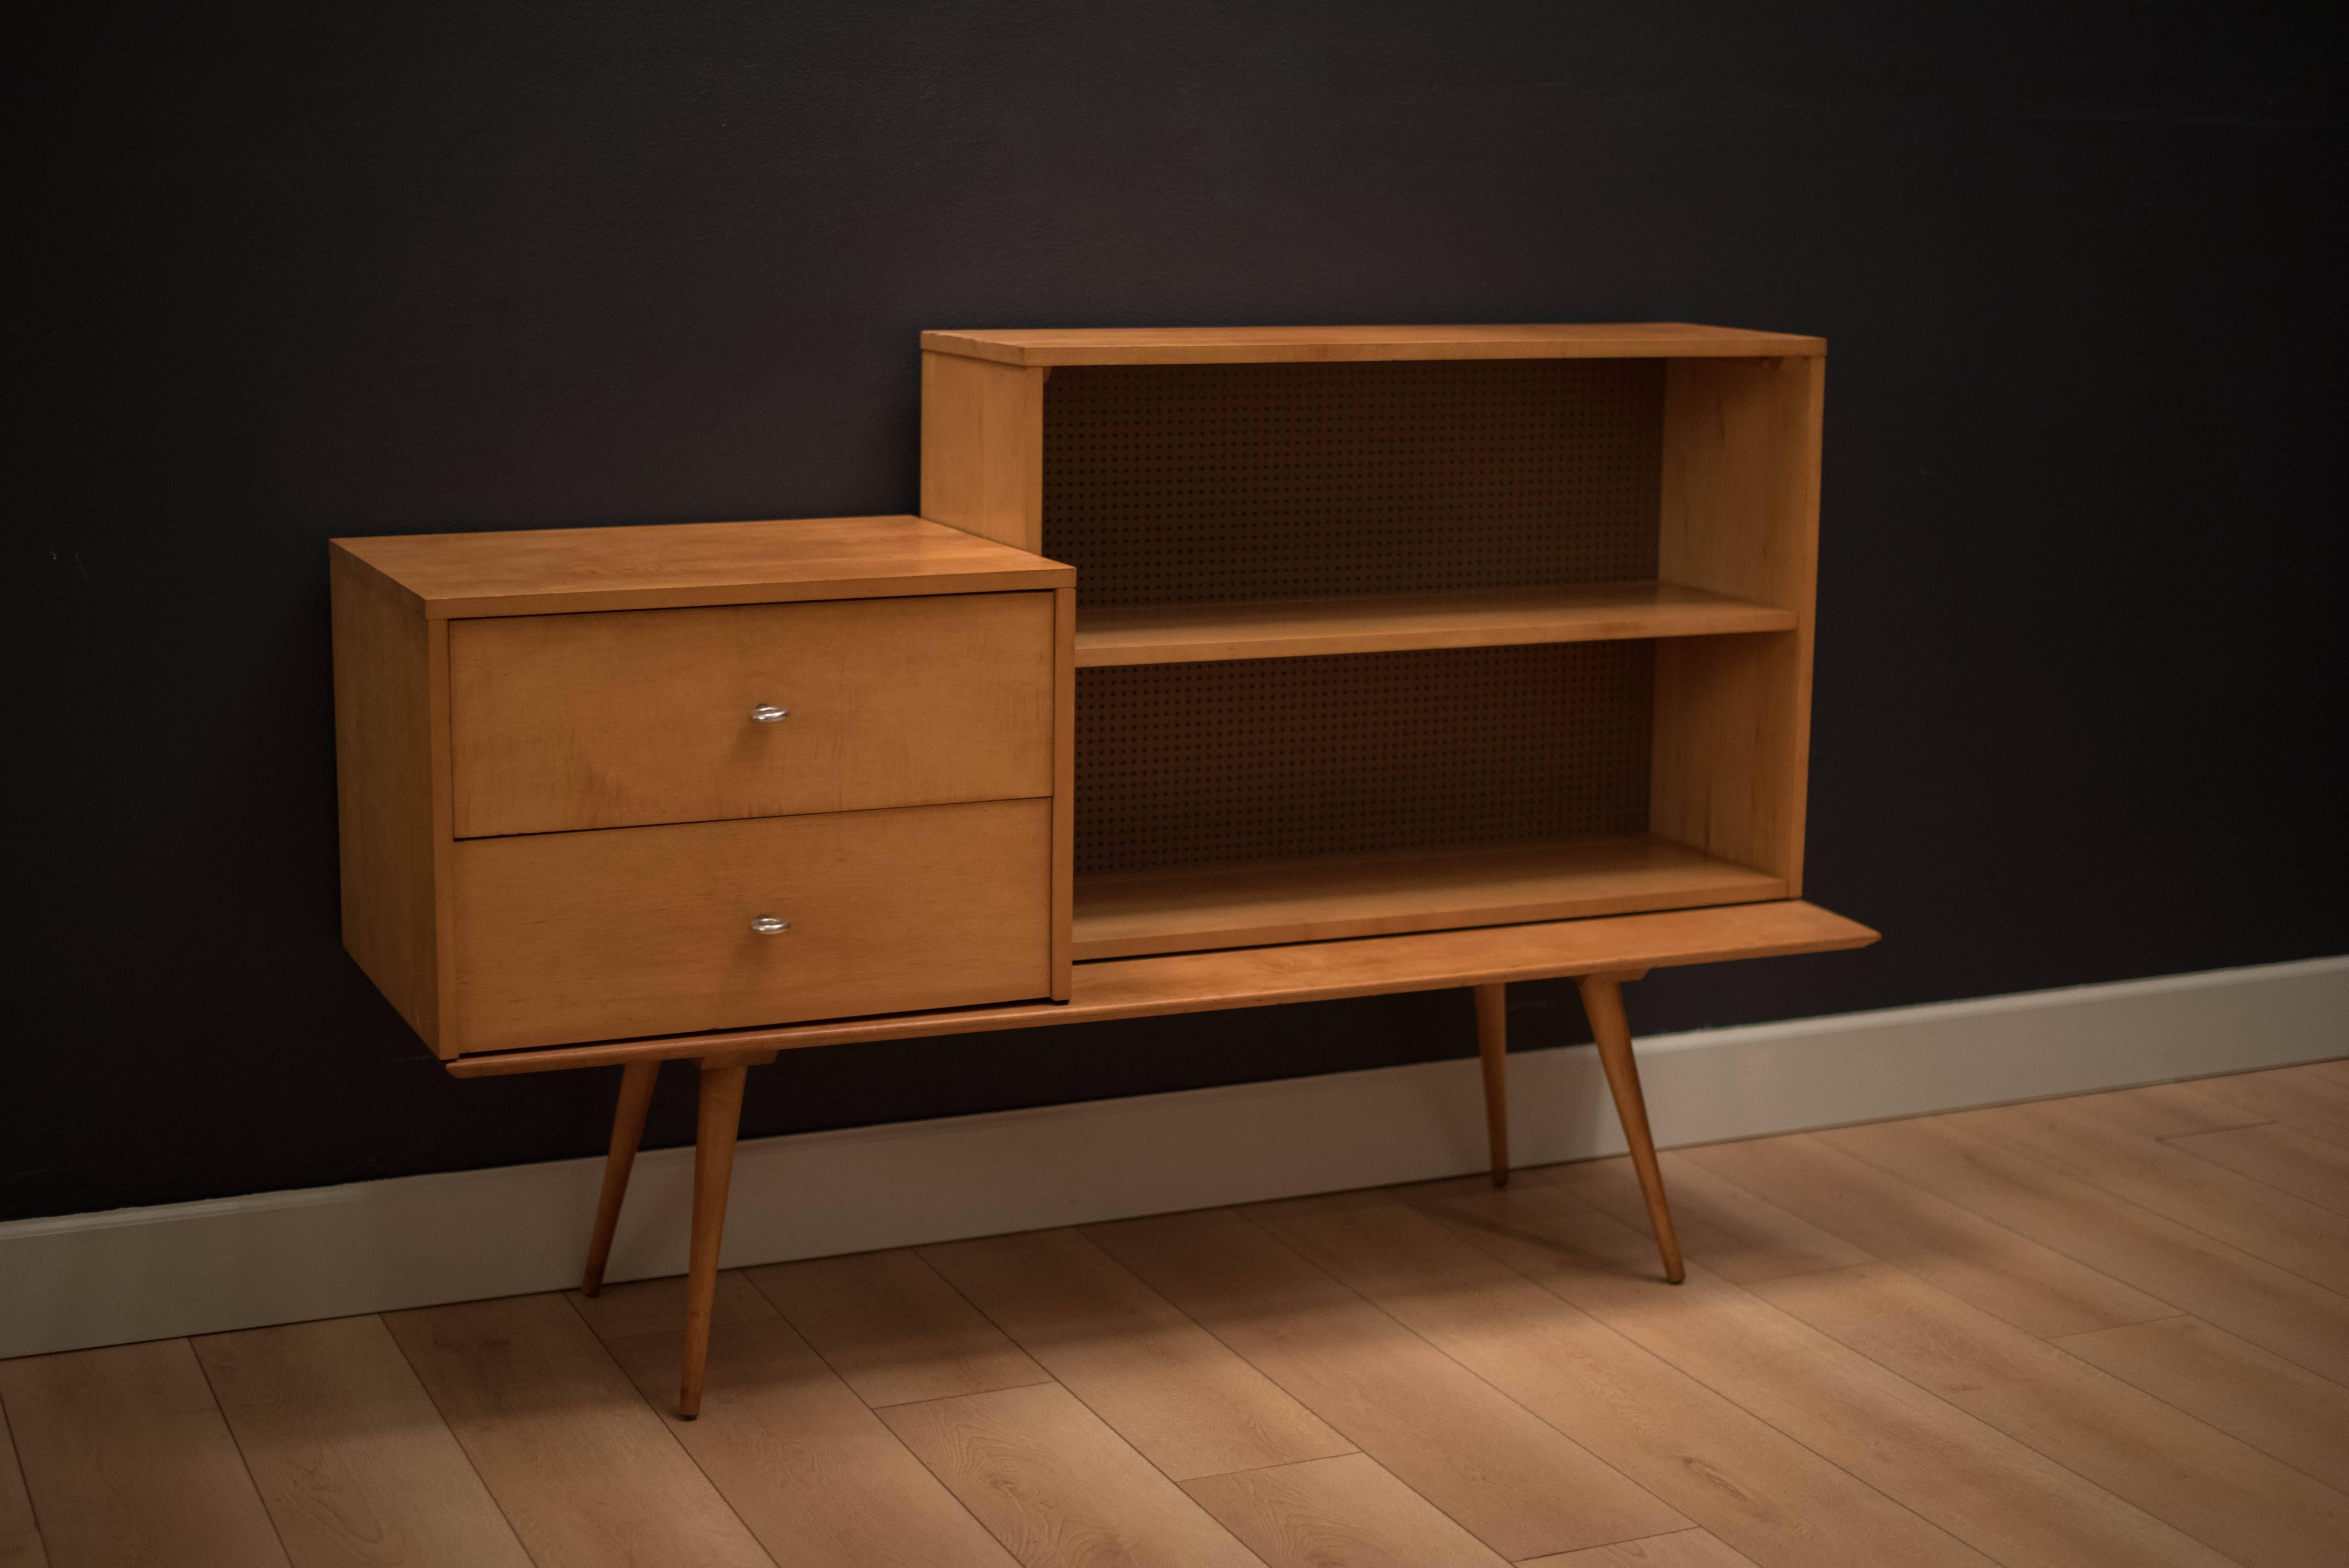 Mid-Century Planner Group three-piece modular credenza unit by Paul McCobb for Winchendon Furniture. This set comes in three separate pieces and can be configured in any arrangement. Includes a two-drawer chest with aluminum pulls, table bench and